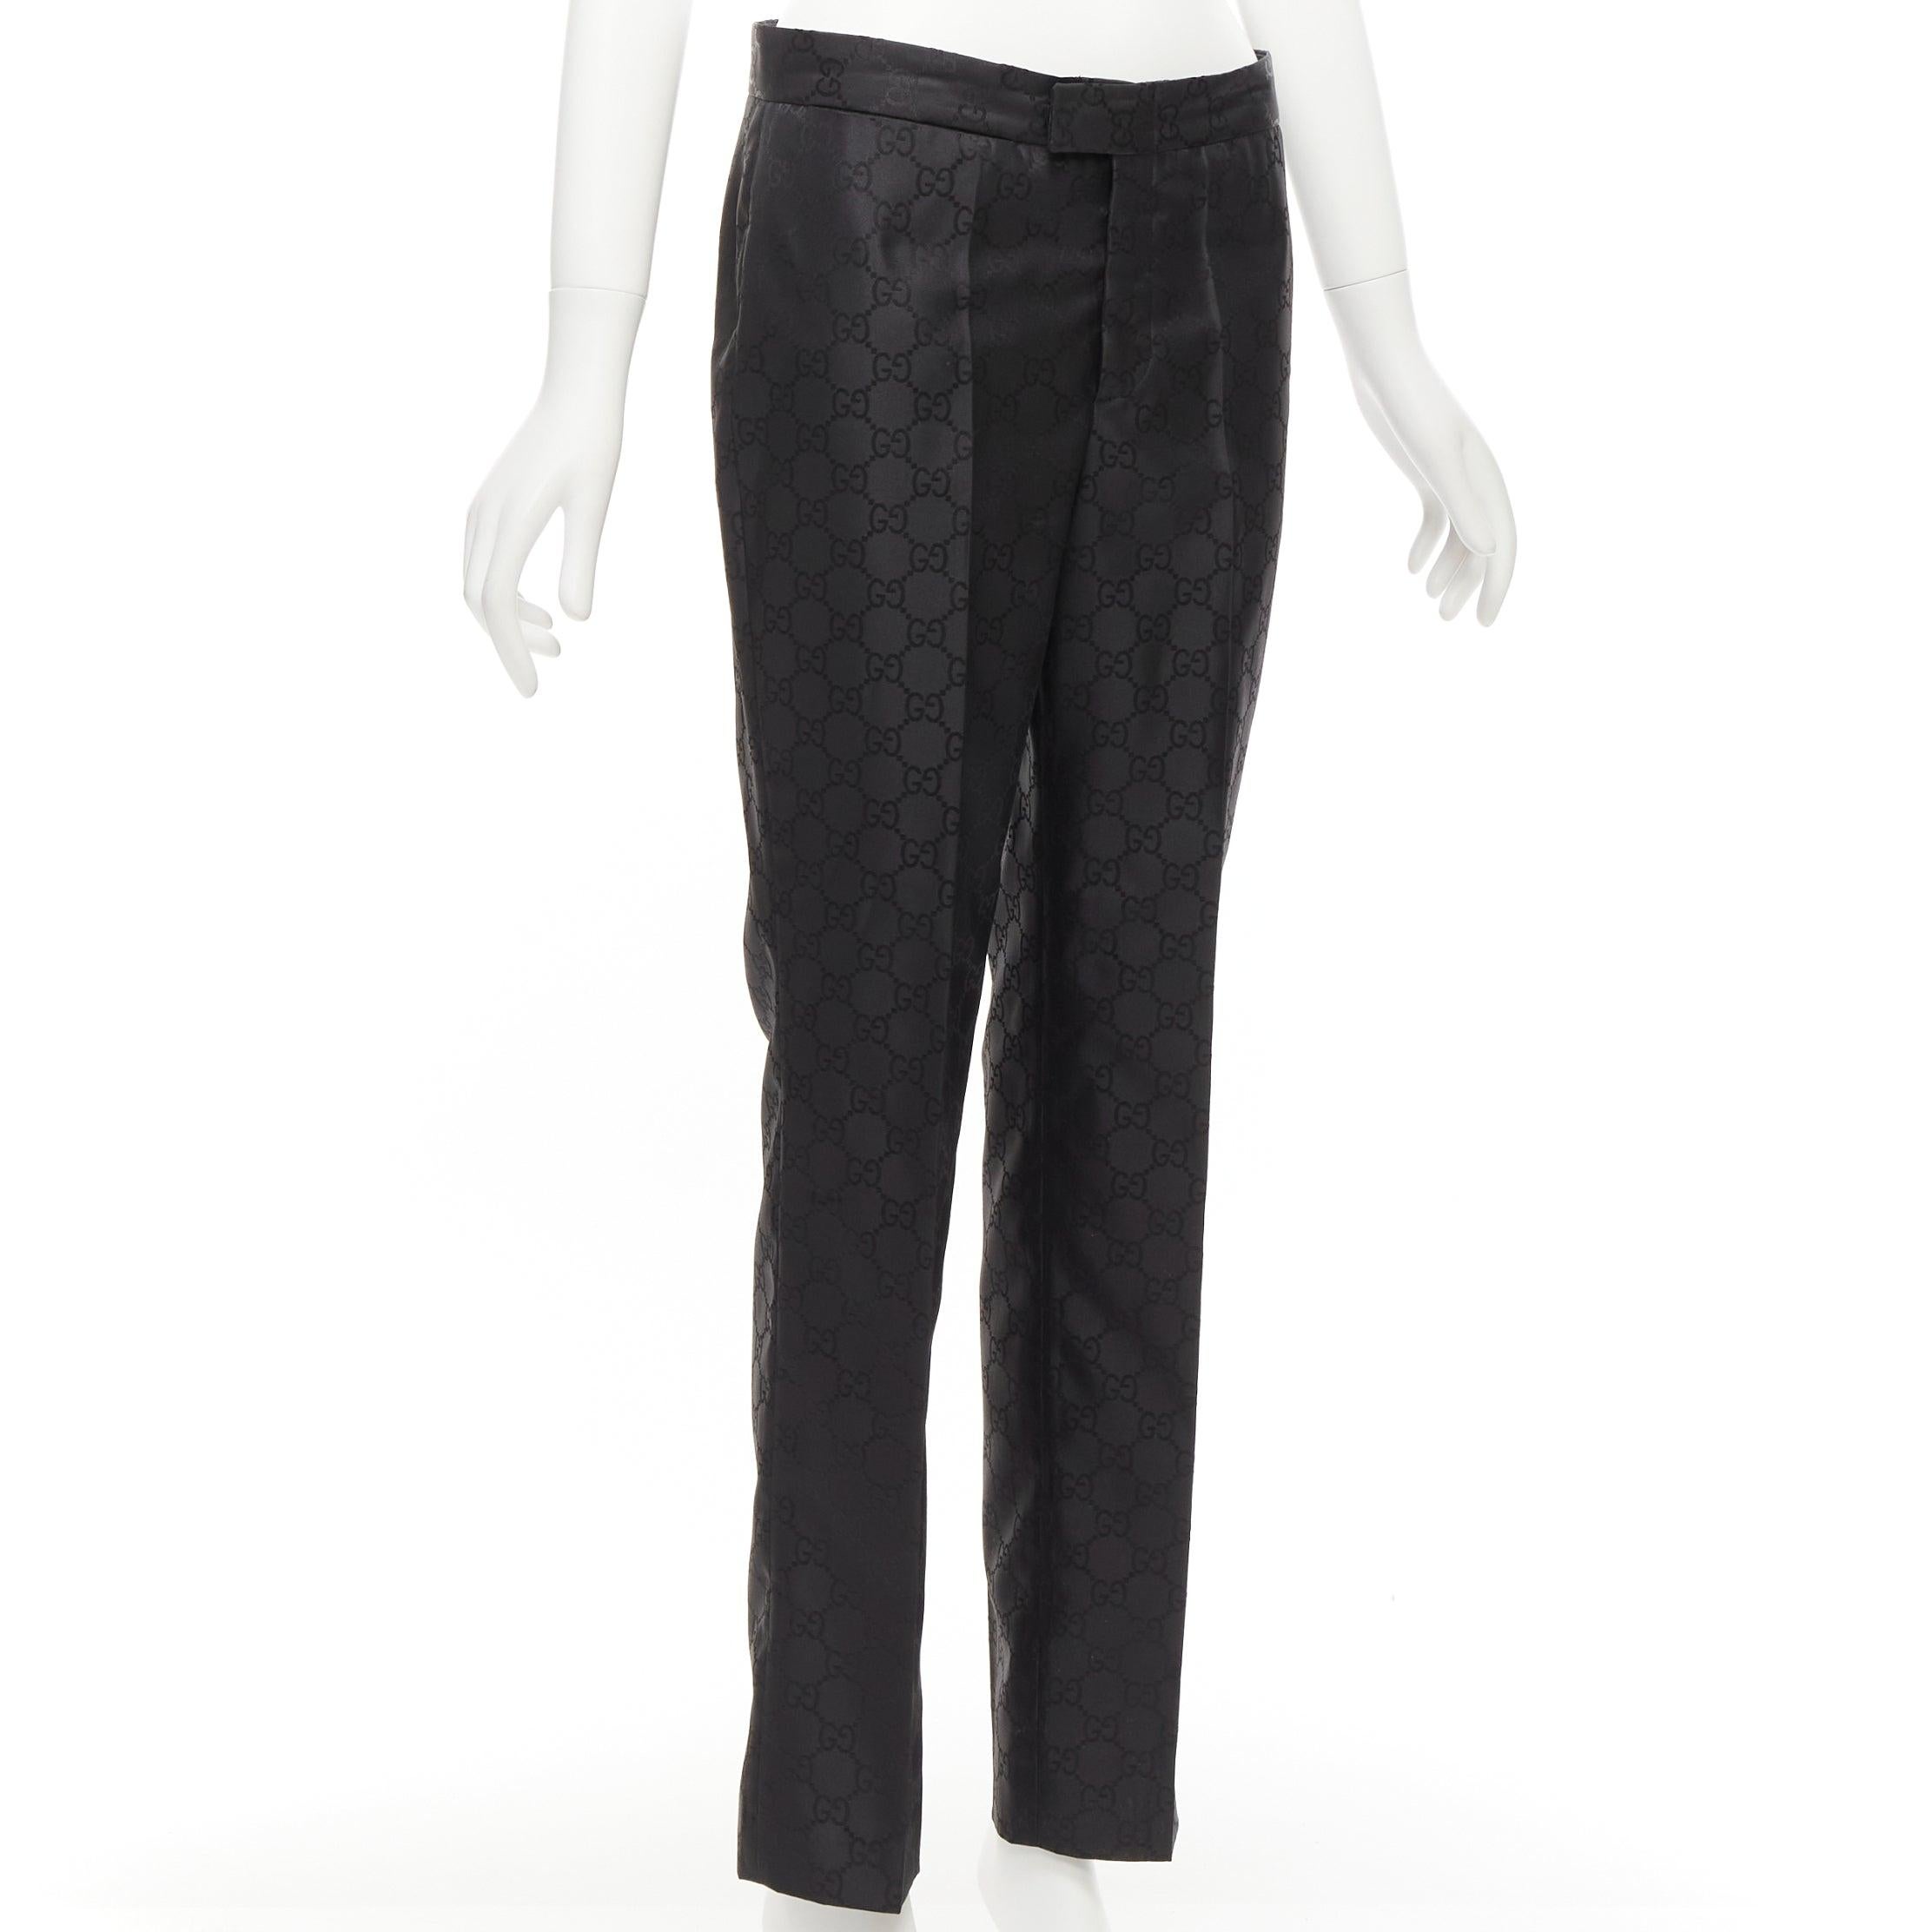 GUCCI Tom Ford Vintage black GG monogram tapered dress pants IT42 XL
Reference: TGAS/D00885
Brand: Gucci
Designer: Tom Ford
Material: Polyester
Color: Black
Pattern: Monogram
Closure: Zip Fly
Lining: Black Rayon
Made in: Italy

CONDITION:
Condition: